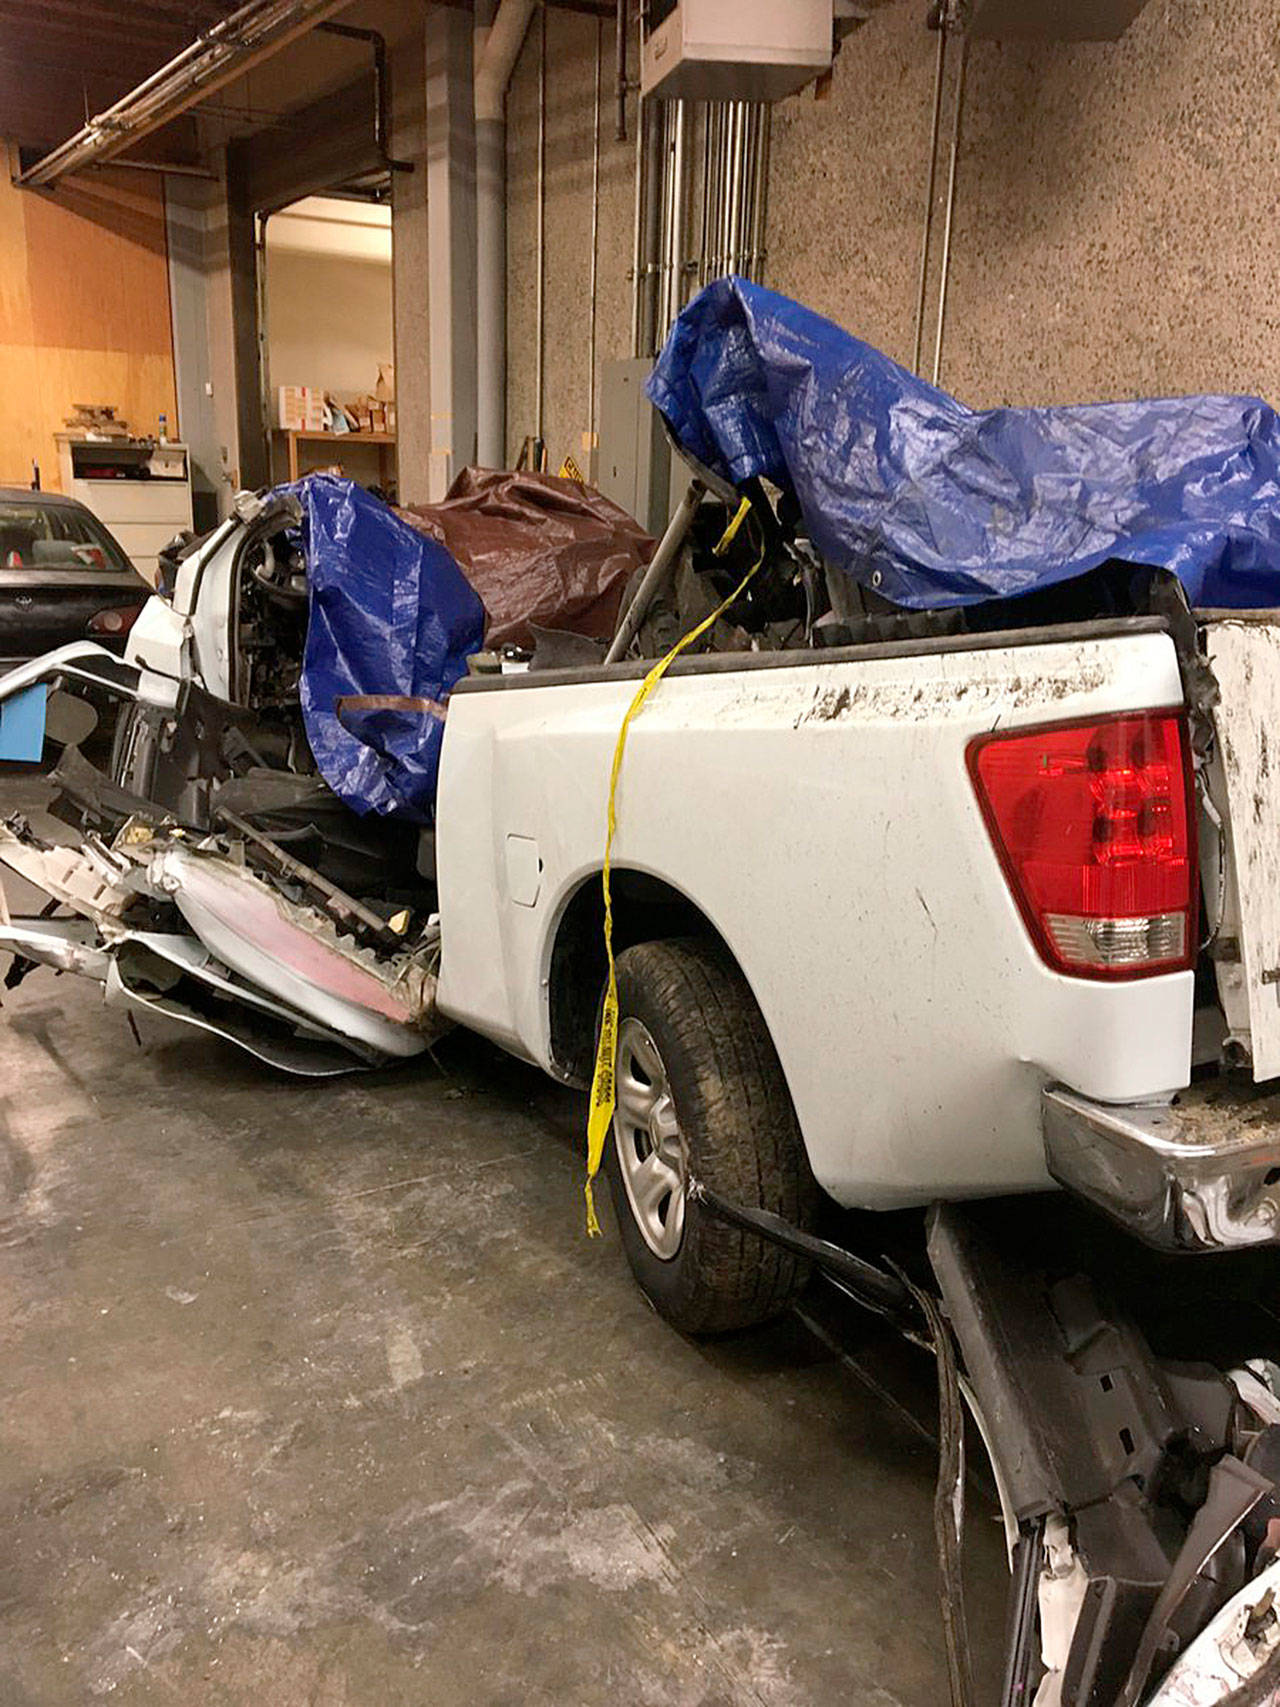 The Washington State Patrol released this photo of the Nissan Titan pickup that crashed and killed four young Kent men on Oct. 7 along State Route 518 in Tukwila. COURTESY PHOTO, State Patrol